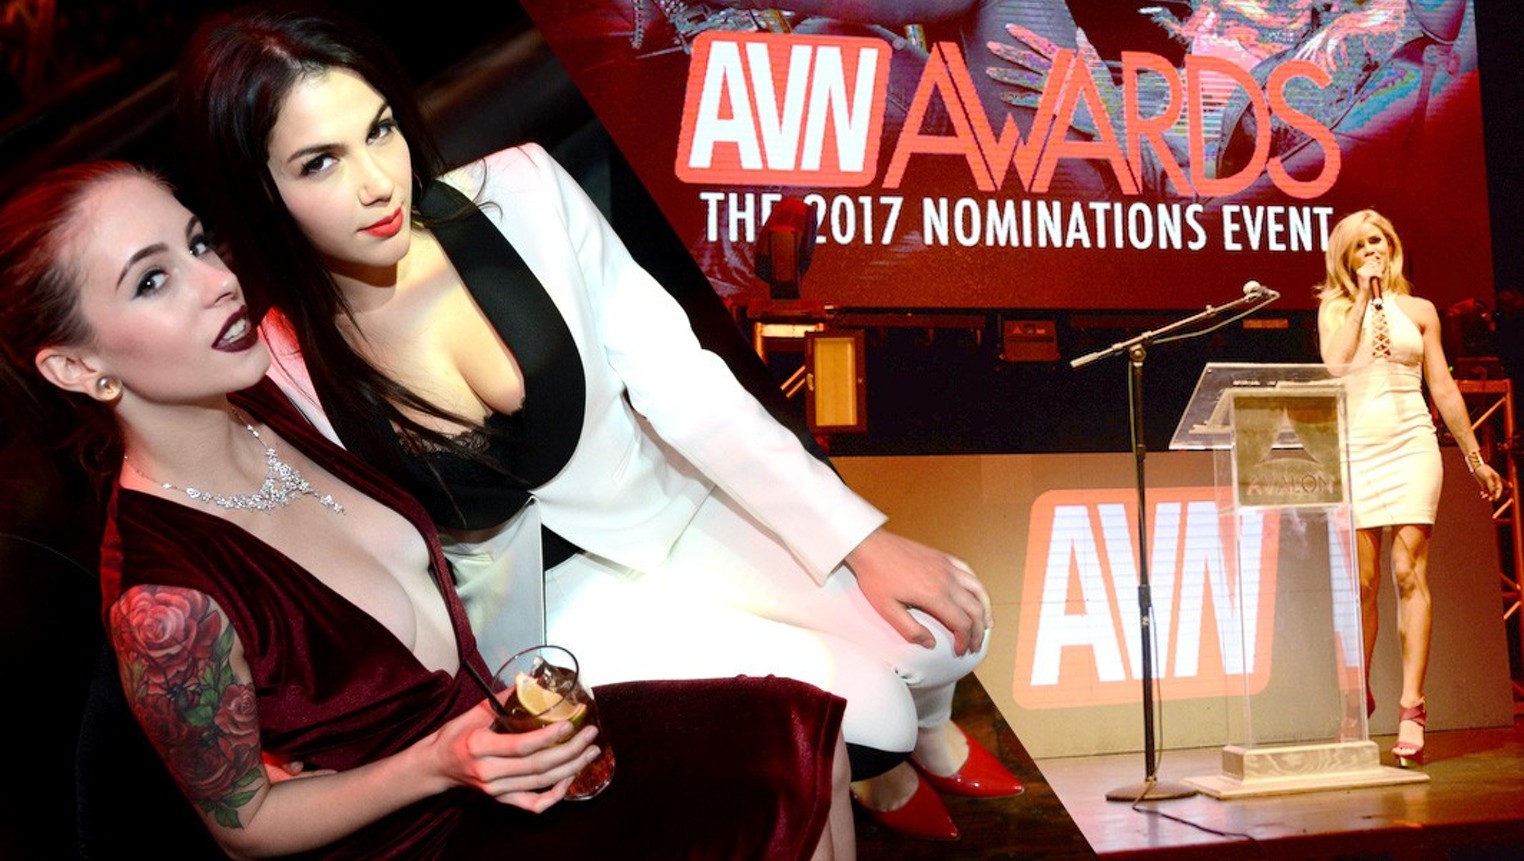 Party Flash Porn - Porn Stars Flash the Camera at AVN Nominations Party (NSFW) | Denver |  Denver Westword | The Leading Independent News Source in Denver, Colorado